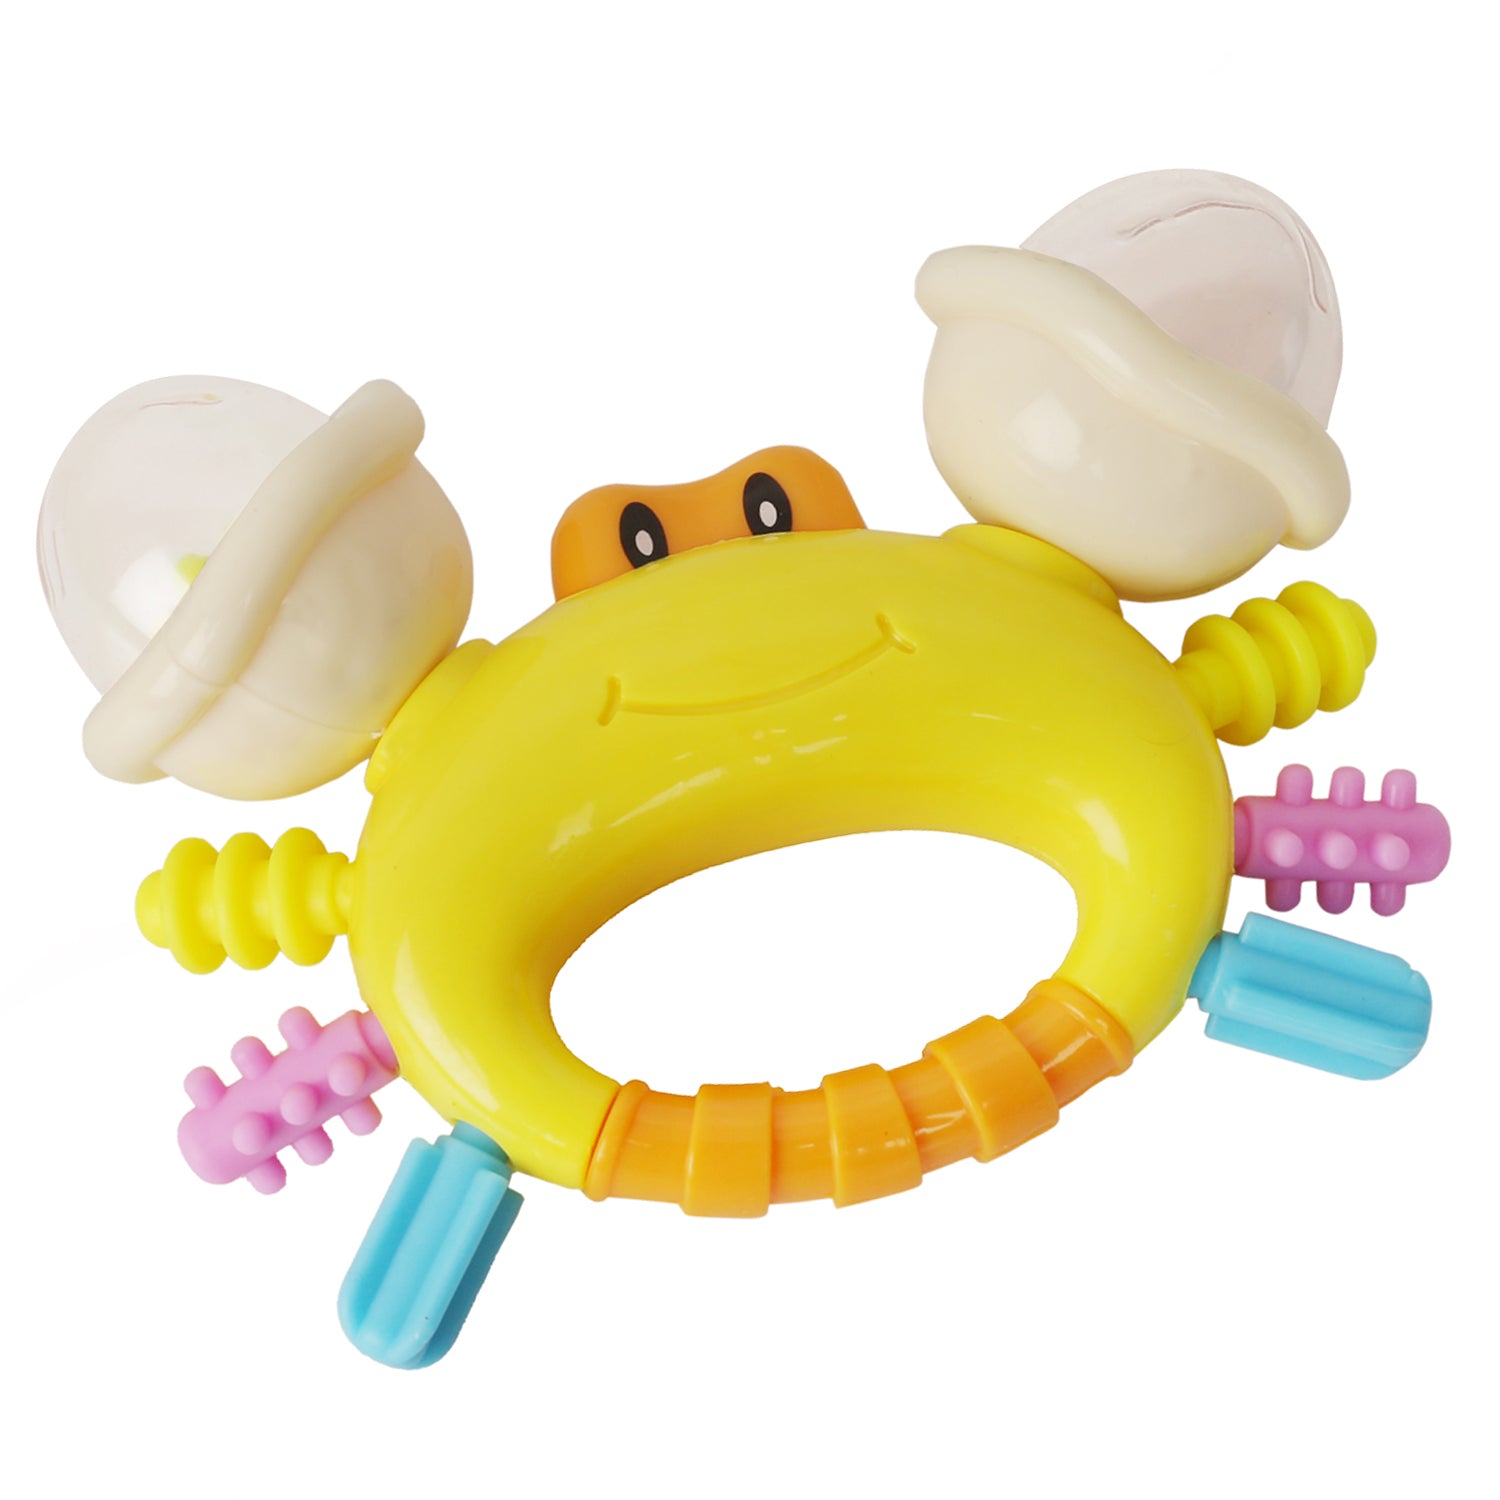 Crab Multicolour Rattle Toy - Baby Moo